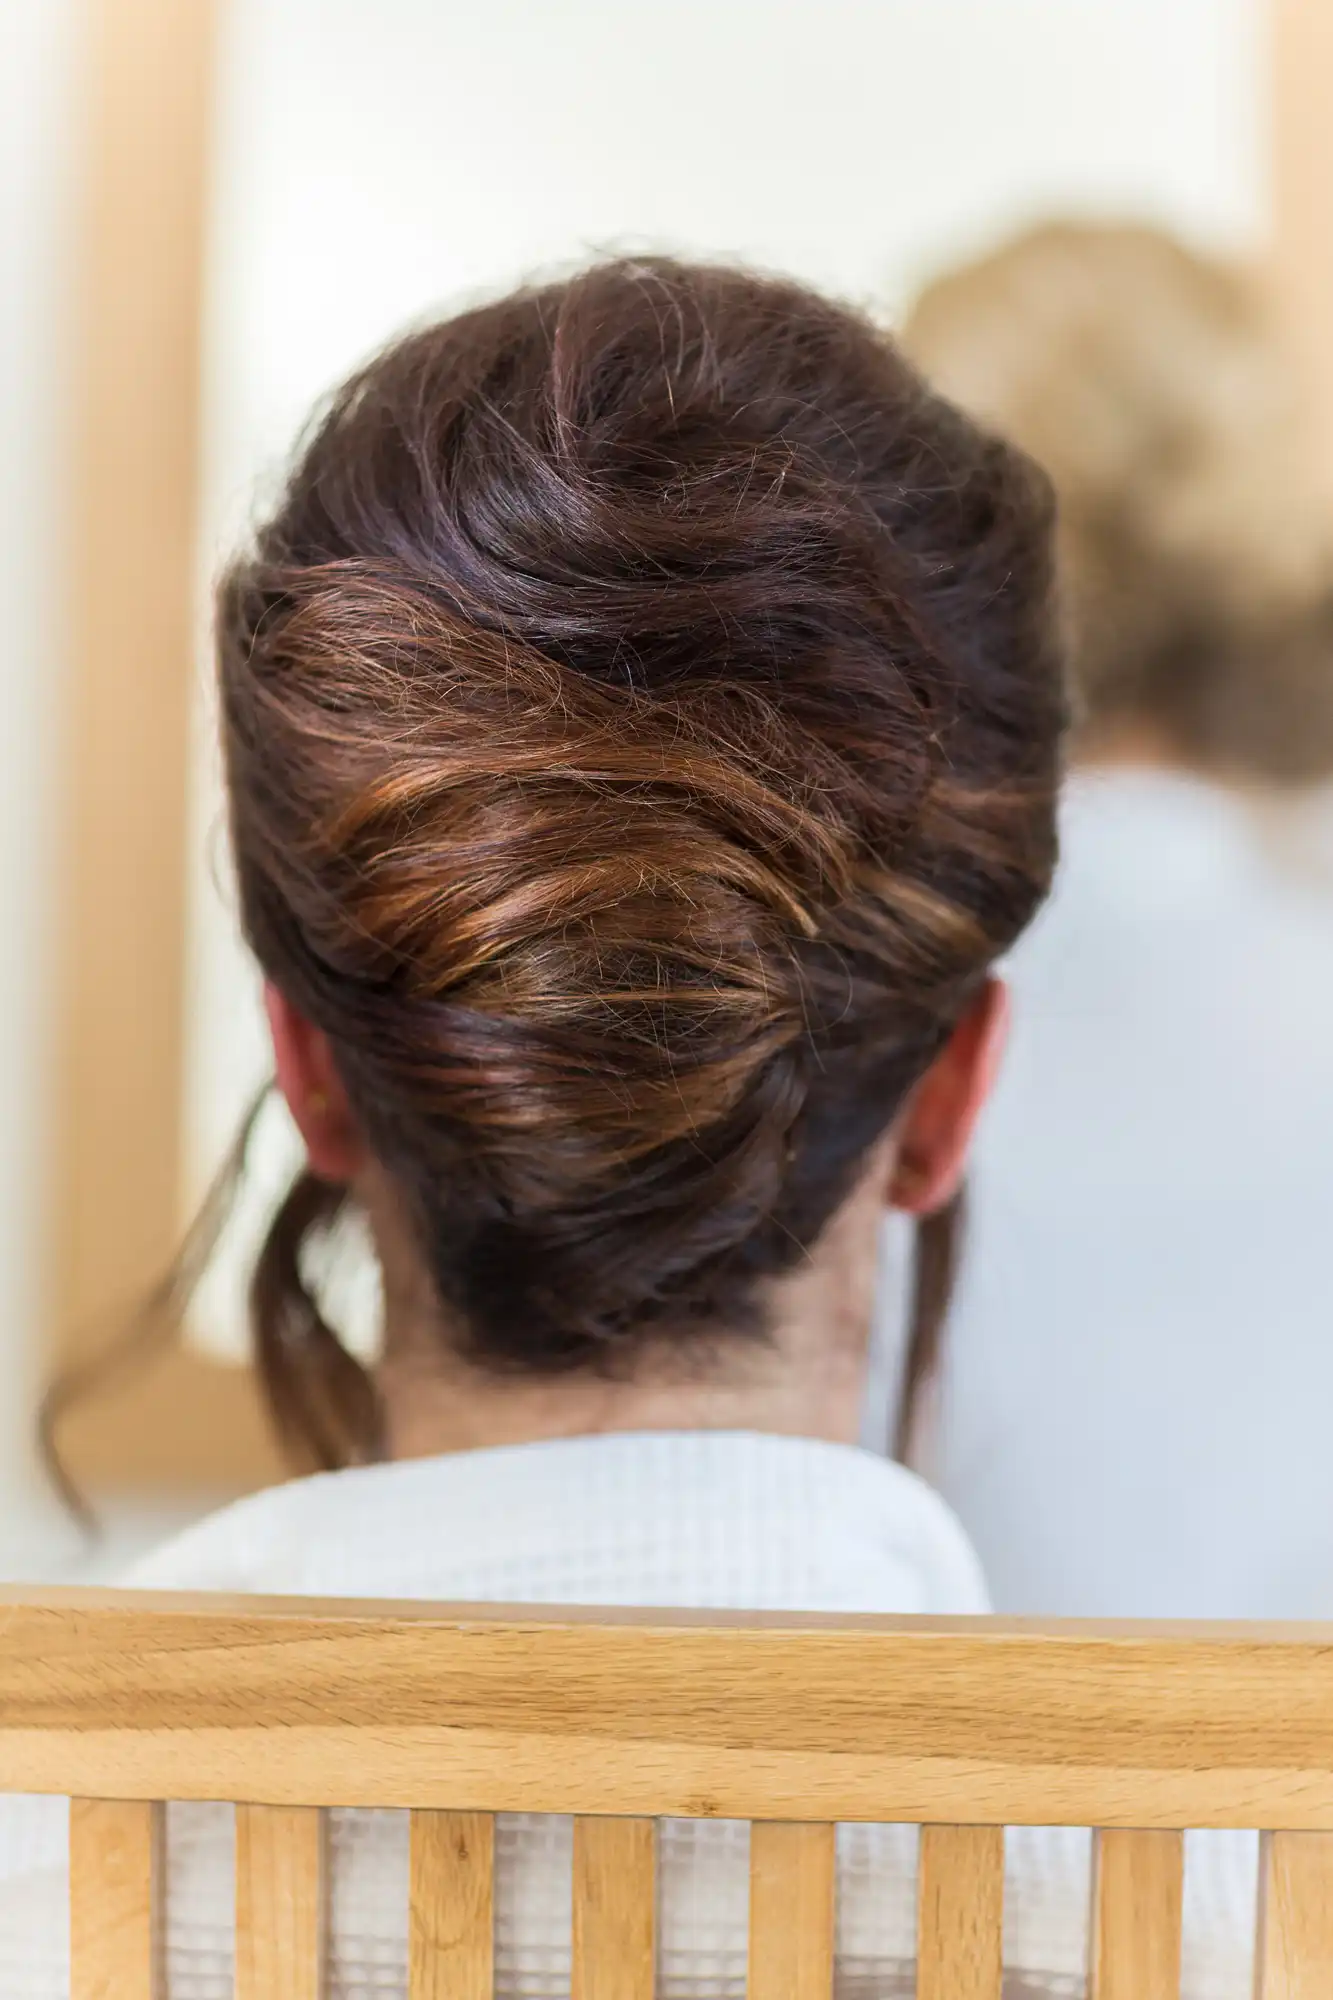 Close-up of a woman's head from behind, showing her brown hair styled in an elegant updo, with visible hairpins.